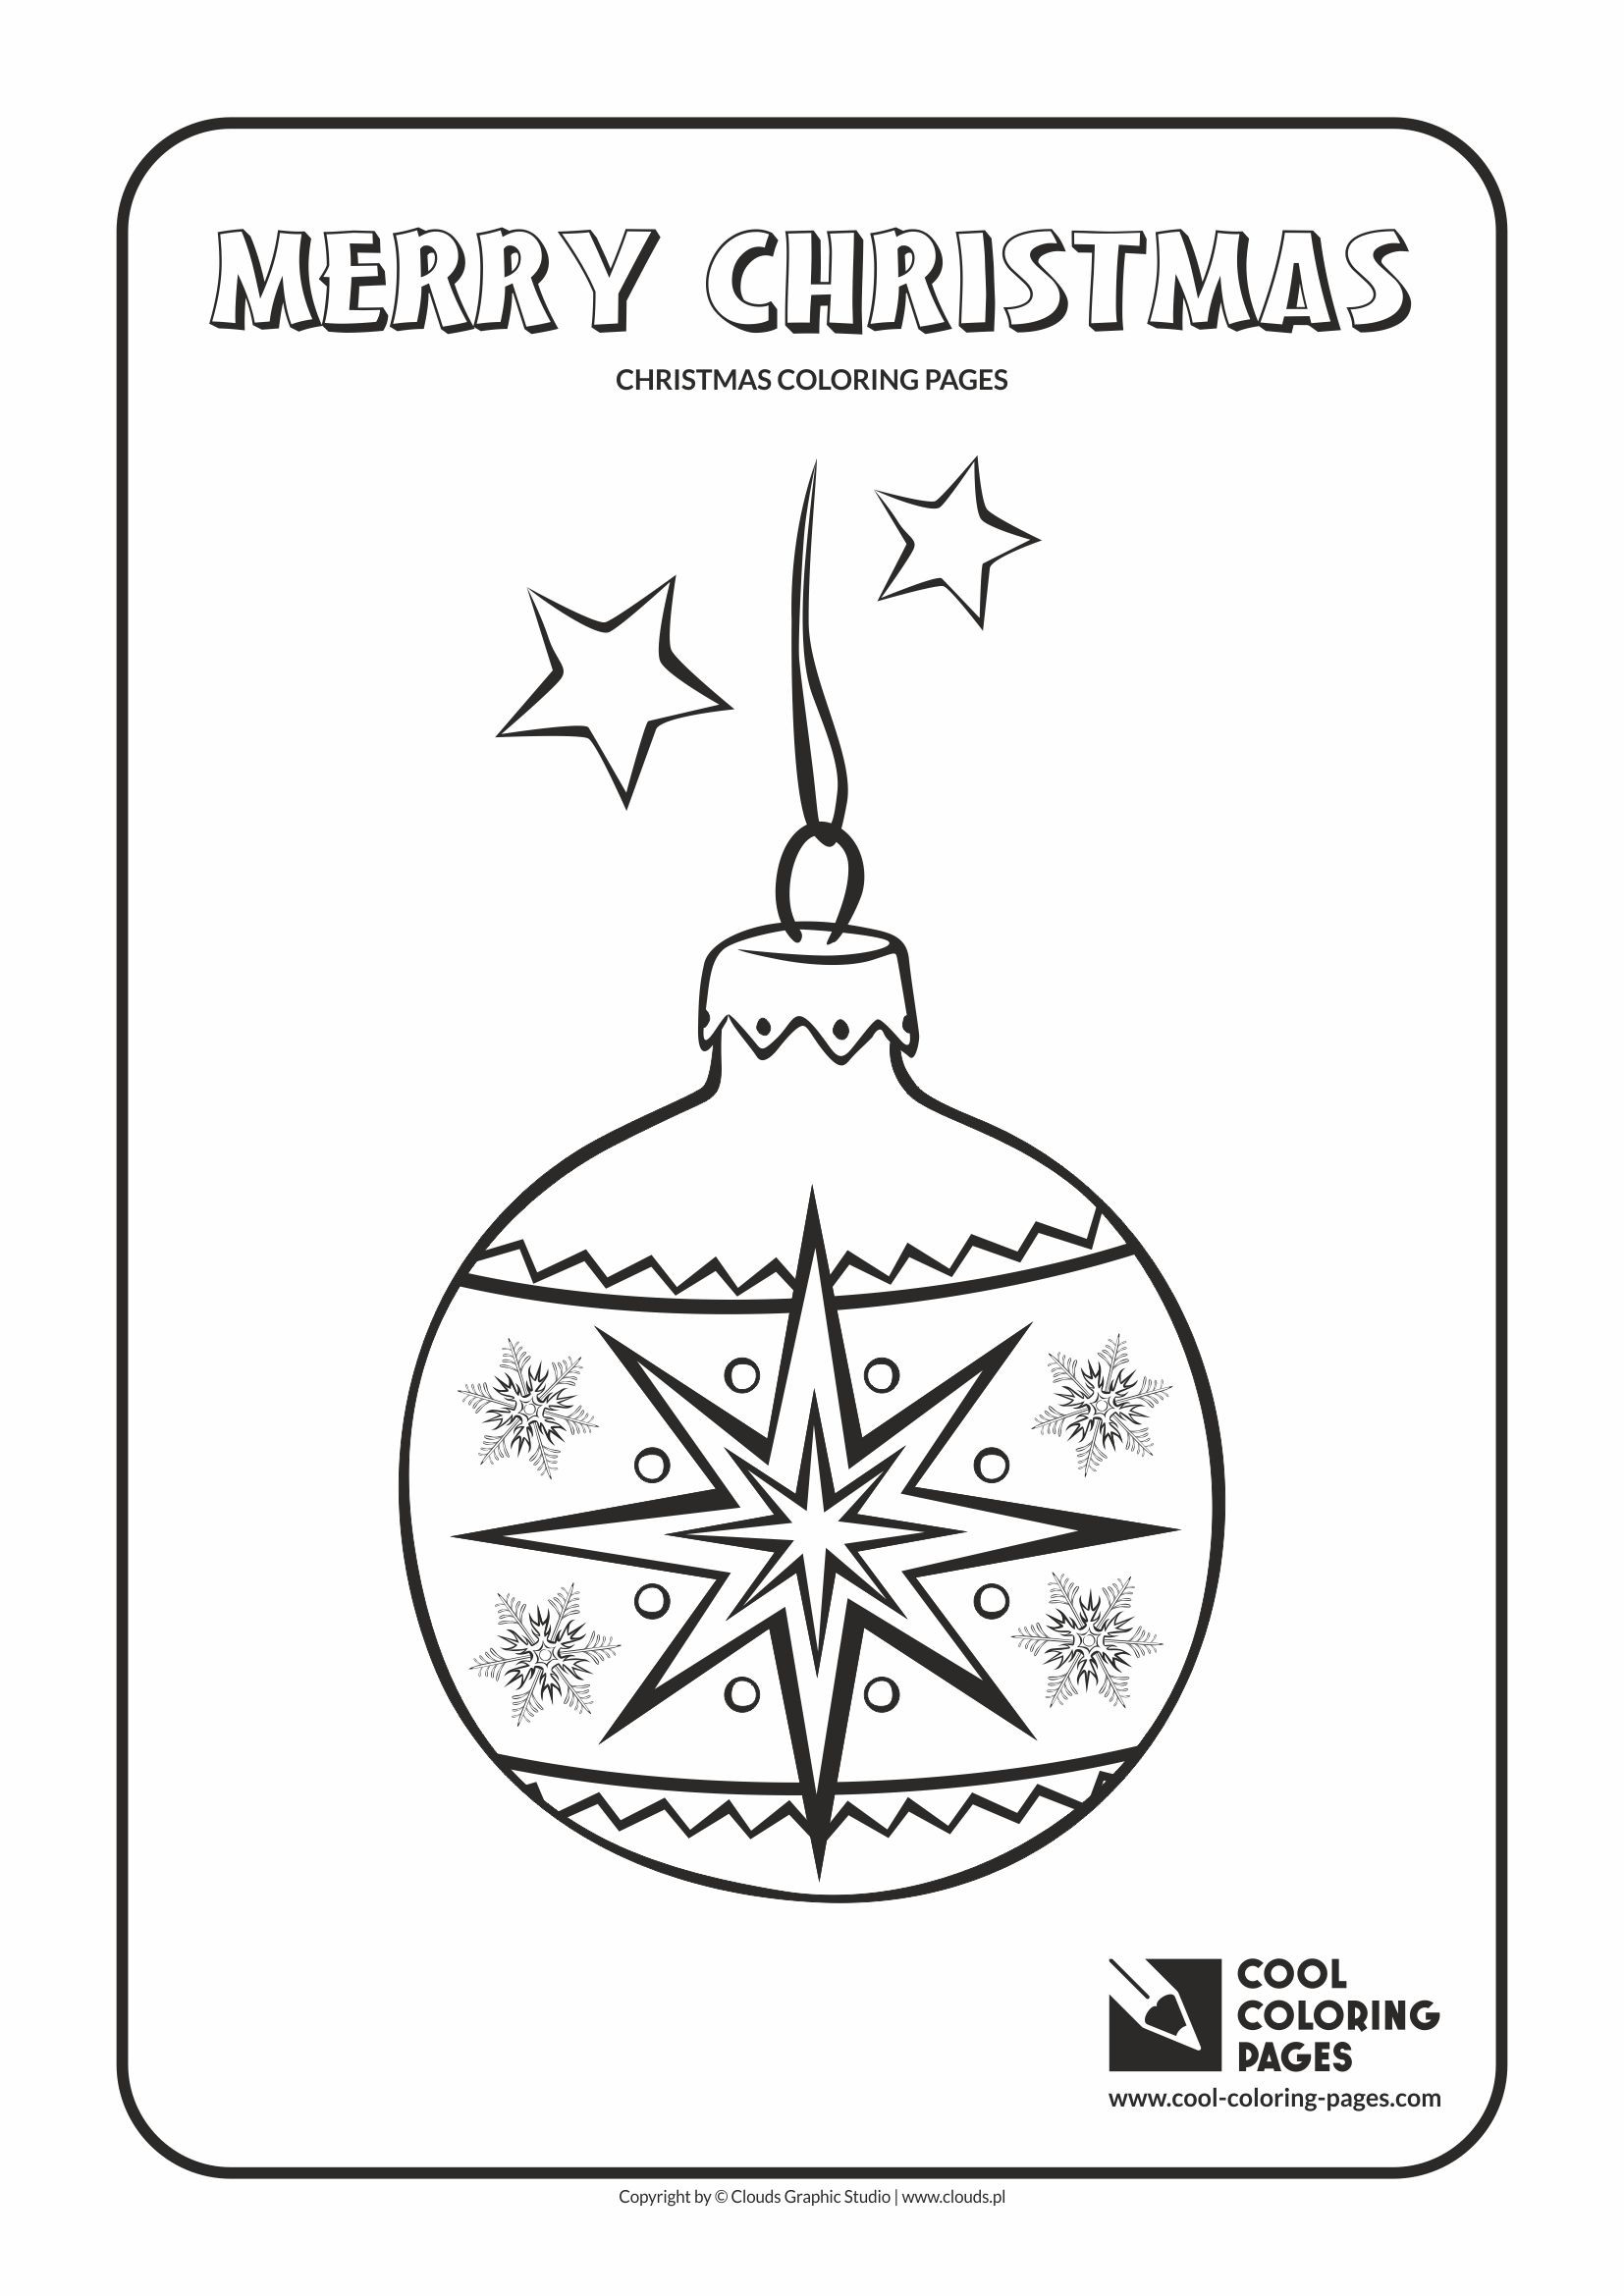 Cool Coloring Pages - Holidays / Christmas glass ball no 3 / Coloring page with Christmas glass ball no 3